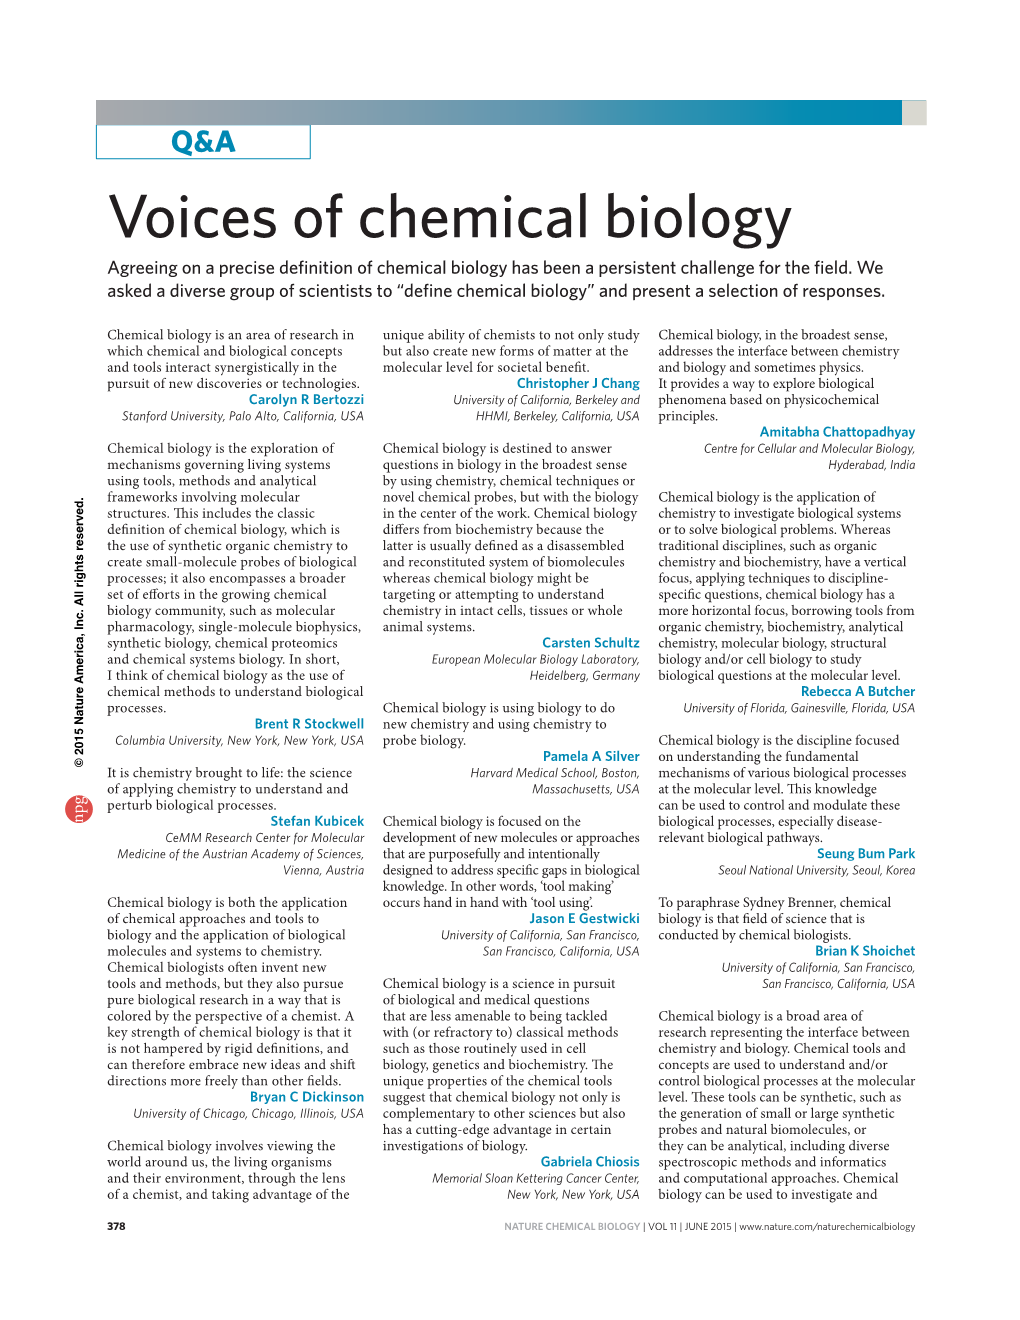 Voices of Chemical Biology Agreeing on a Precise Deﬁnition of Chemical Biology Has Been a Persistent Challenge for the ﬁeld